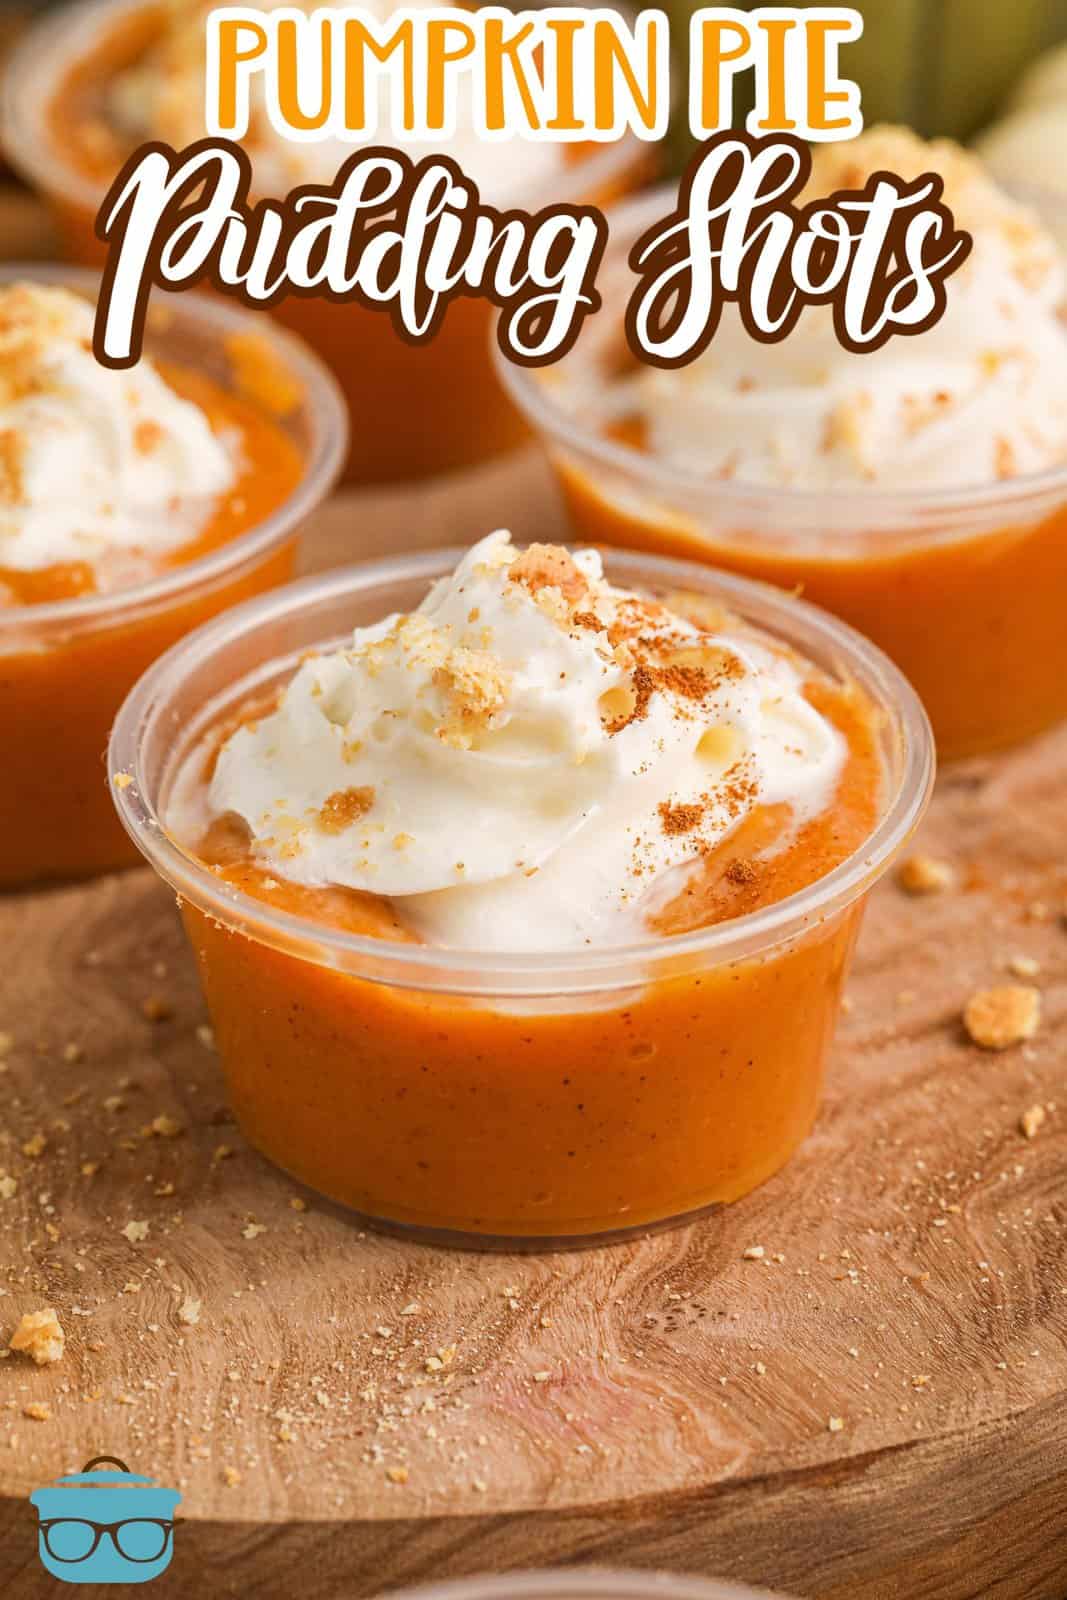 A few homemade Pumpkin Pie Pudding Shots with whipped cream on top.